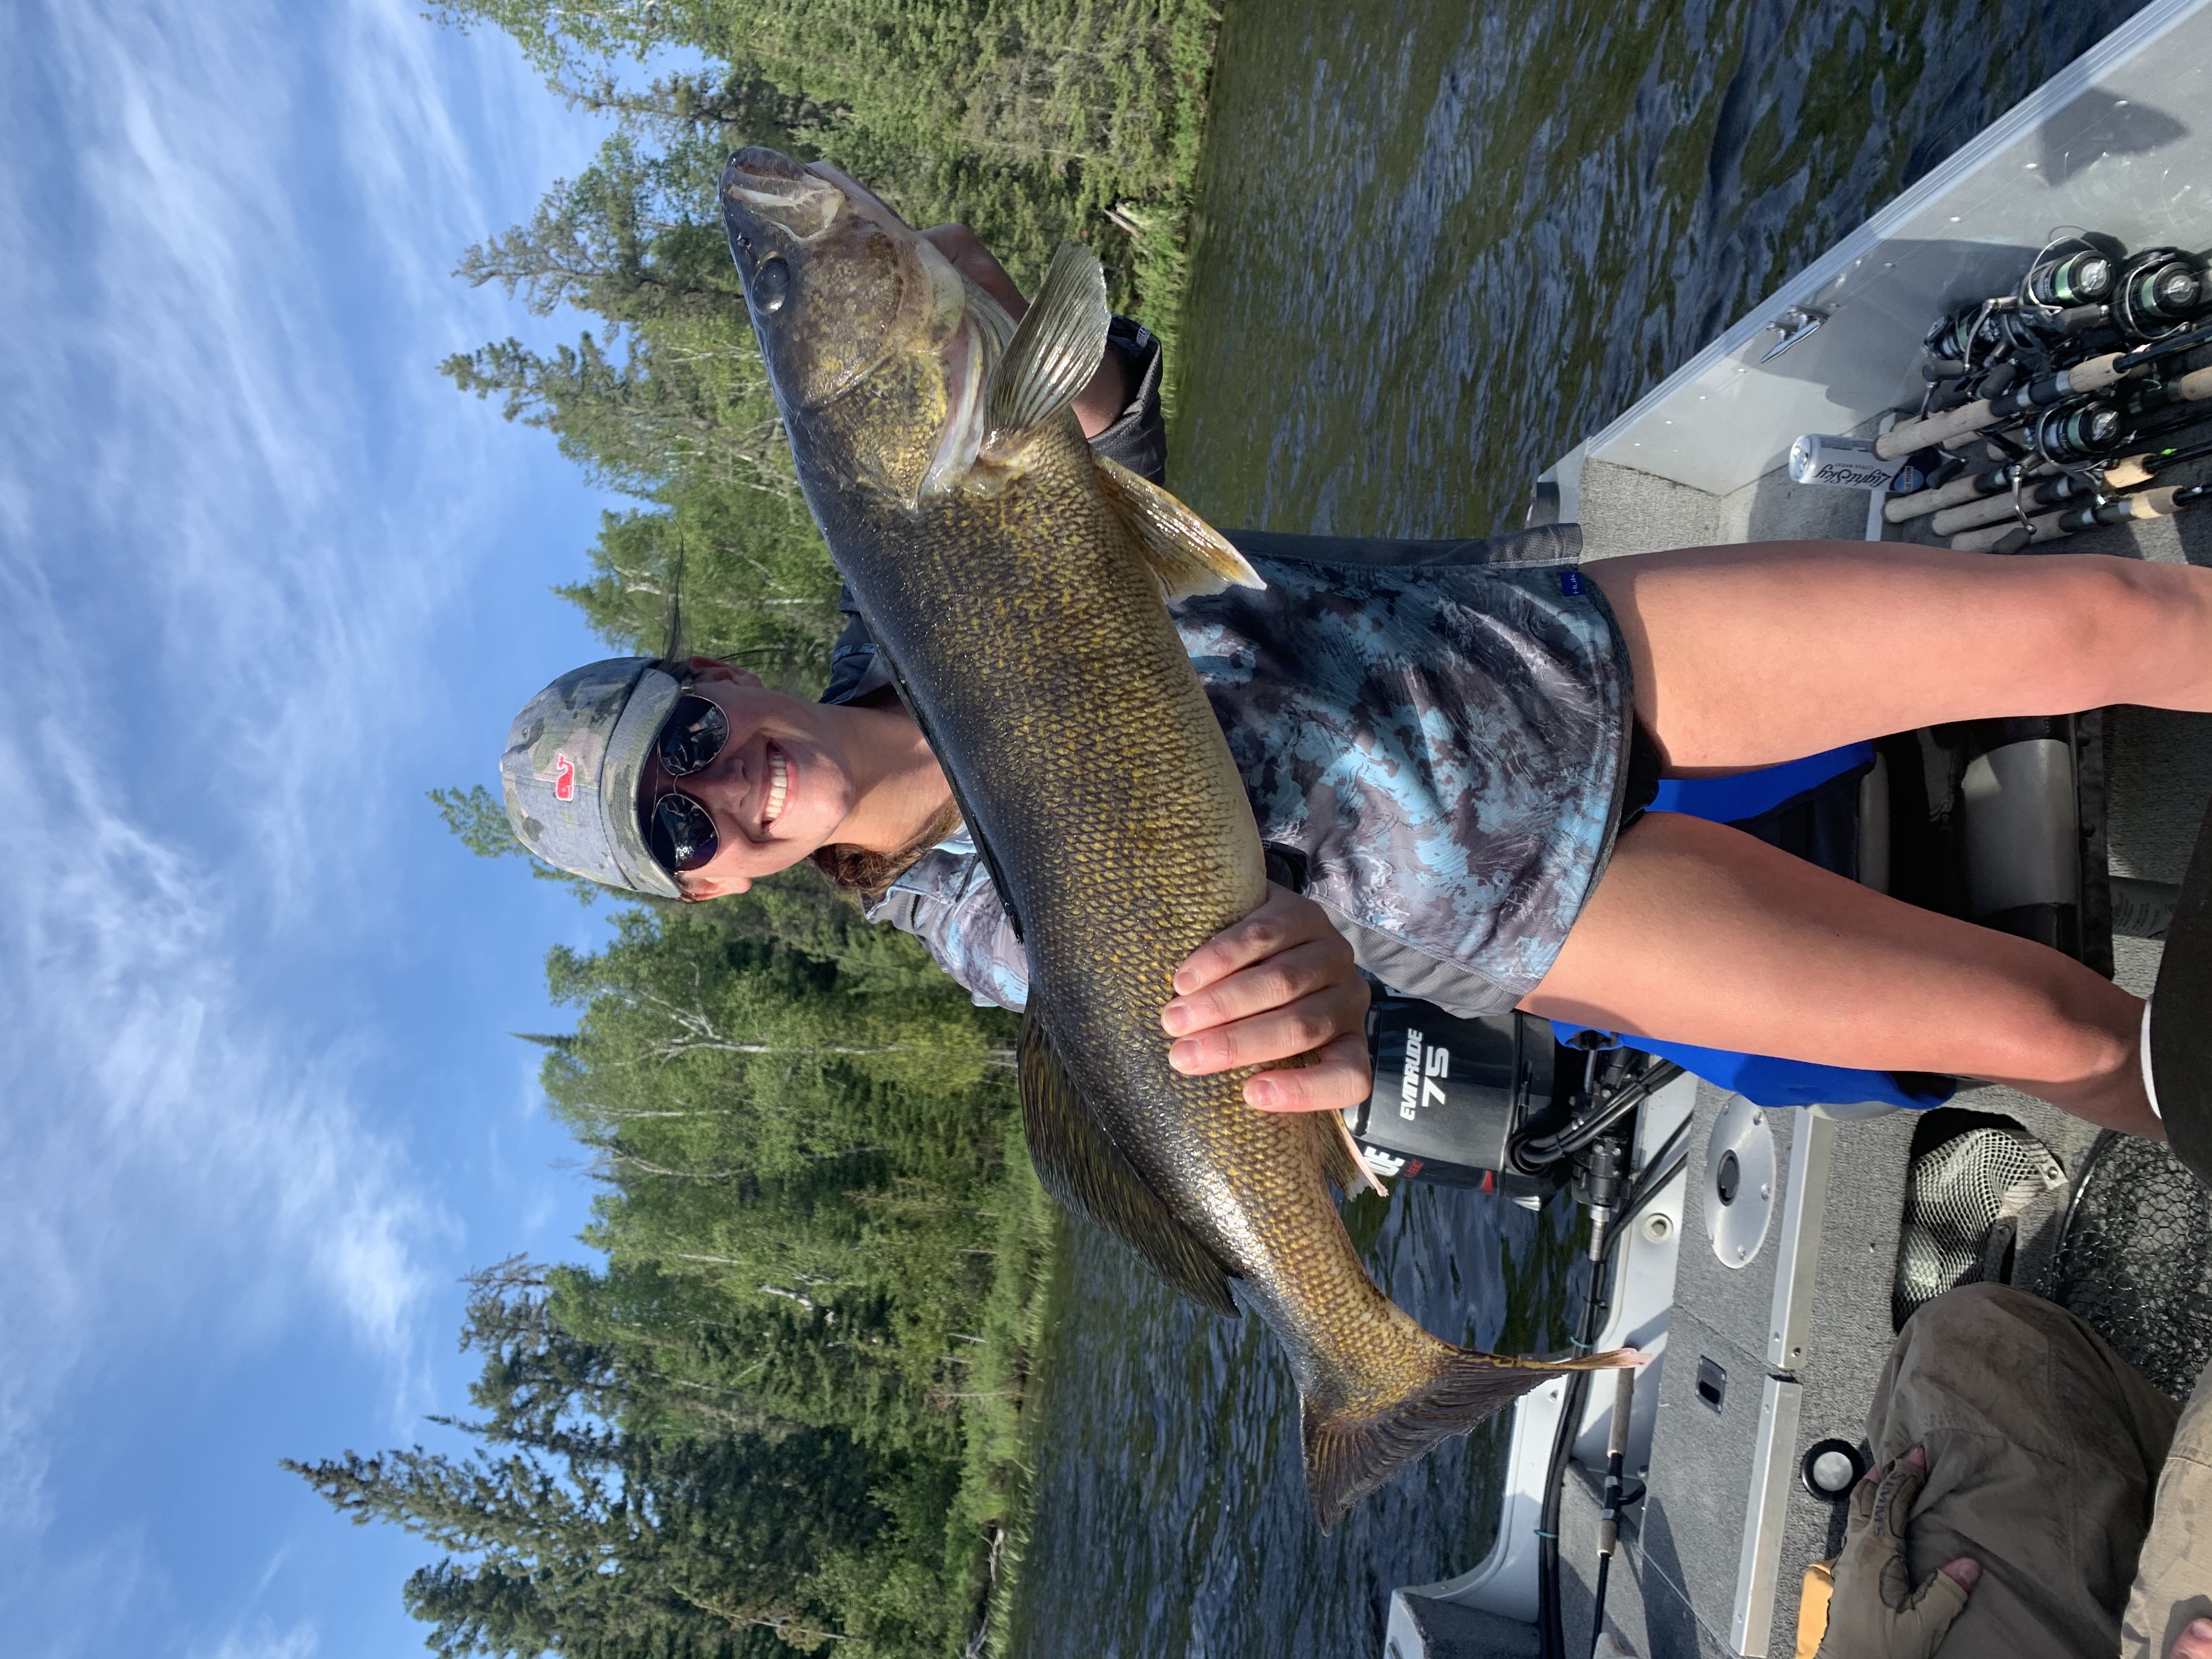 Specials Packages-Fishing Packages, Military Discounts, Honeymoons, Family Reunion-River Point Resort-Birch Lake-Ely MN